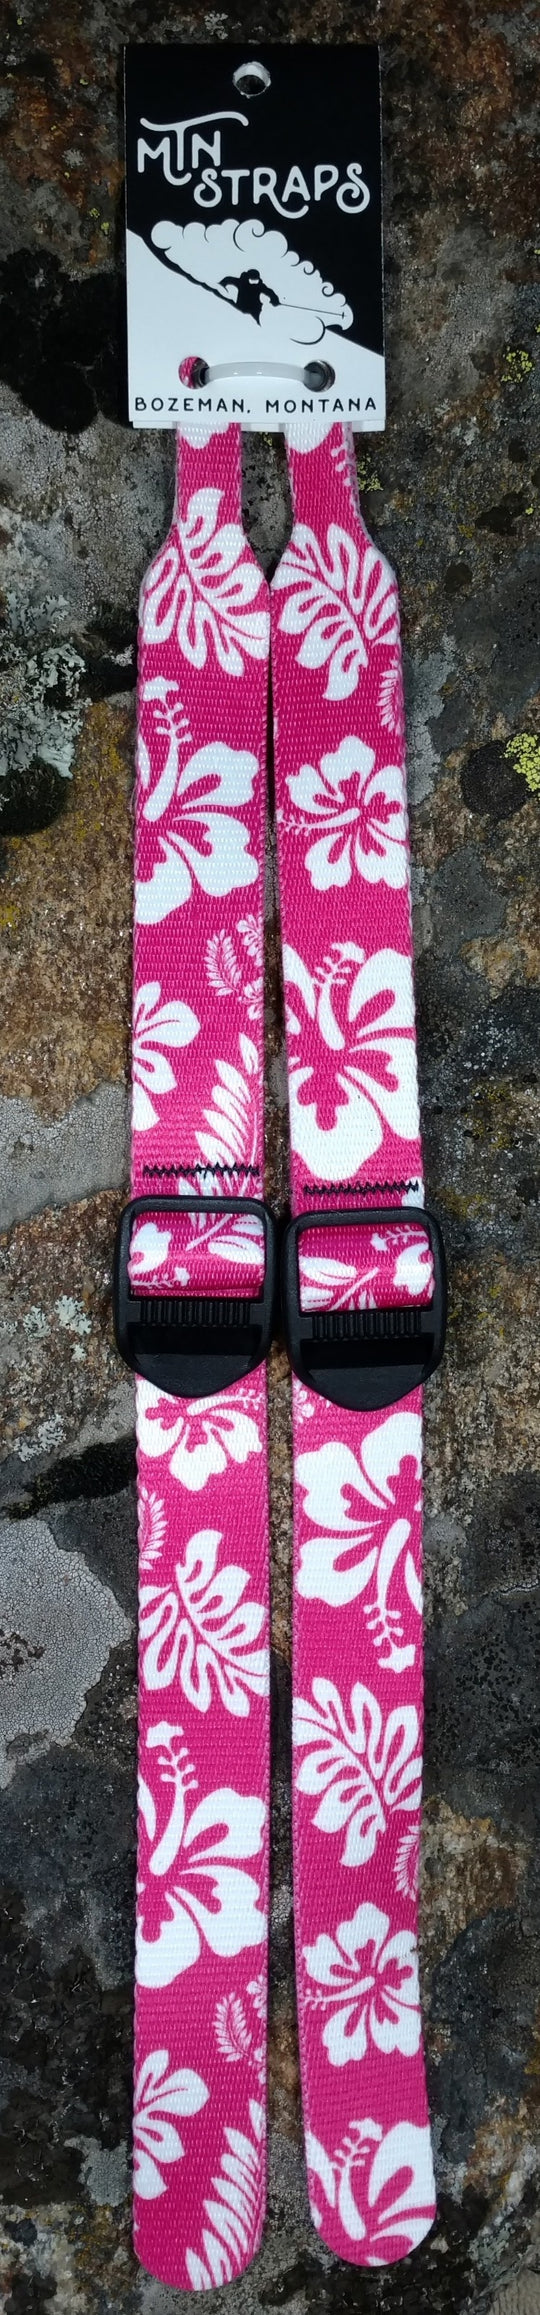 Replacement straps for ski poles.